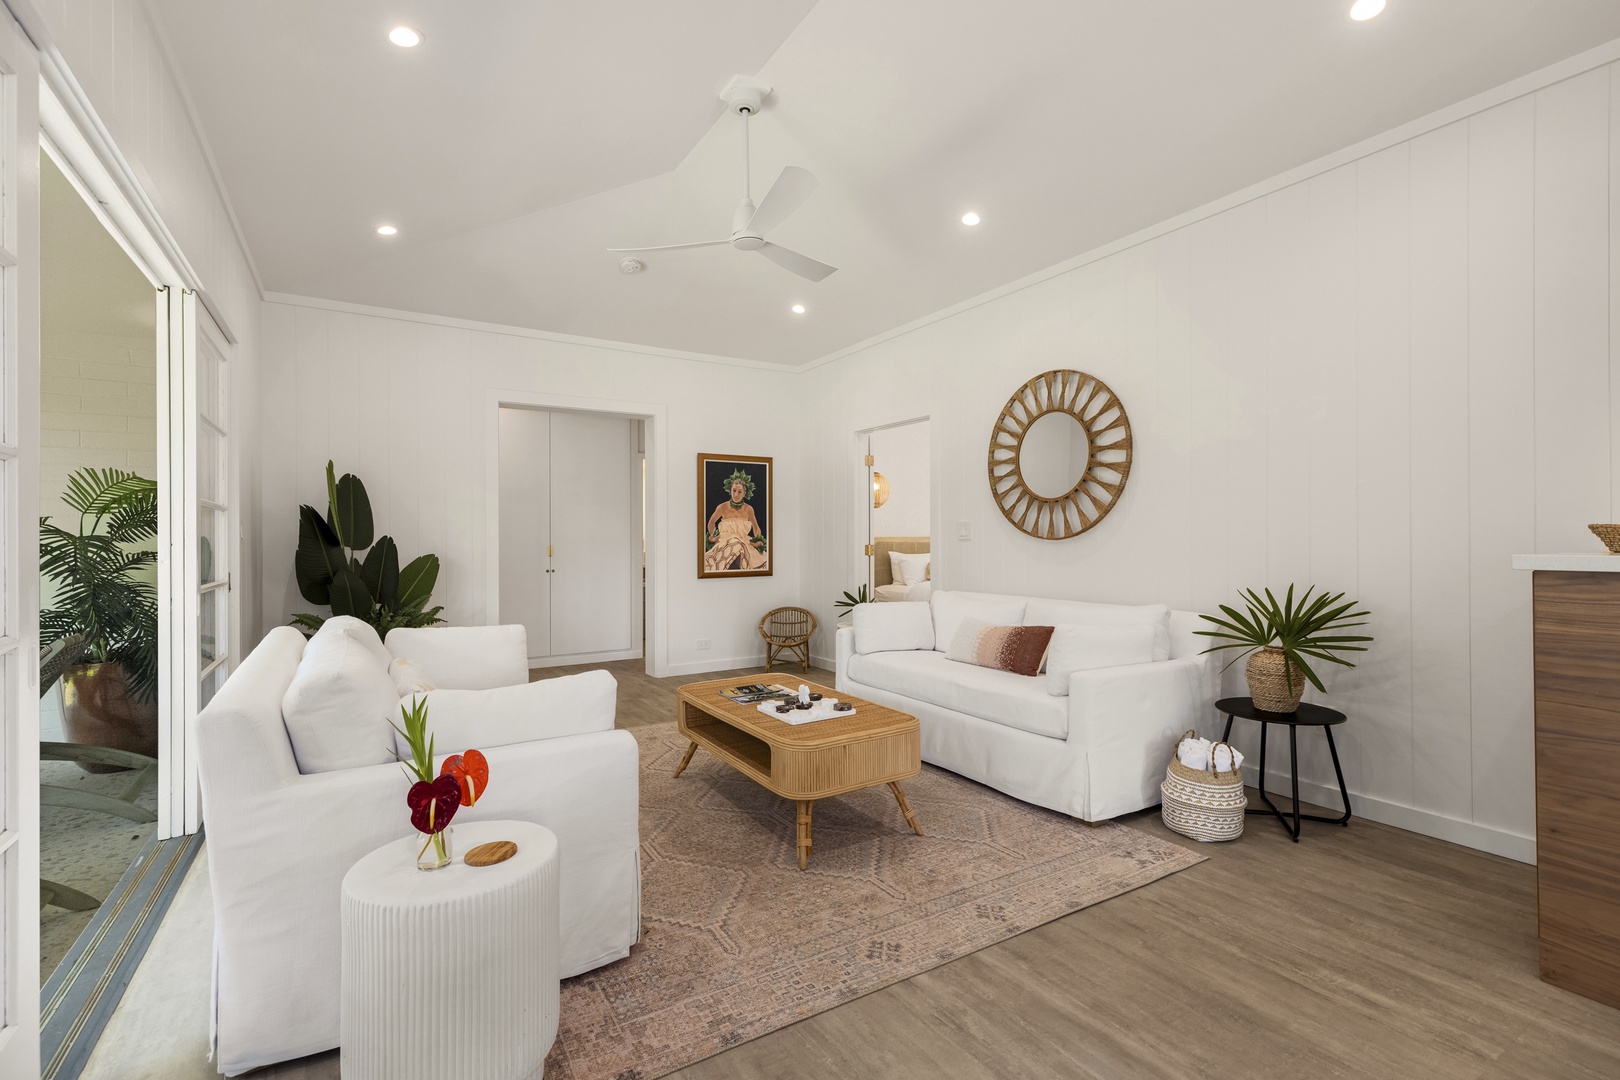 Kailua Vacation Rentals, Lanikai Hideaway - Bright and airy living space with designer touches throughout